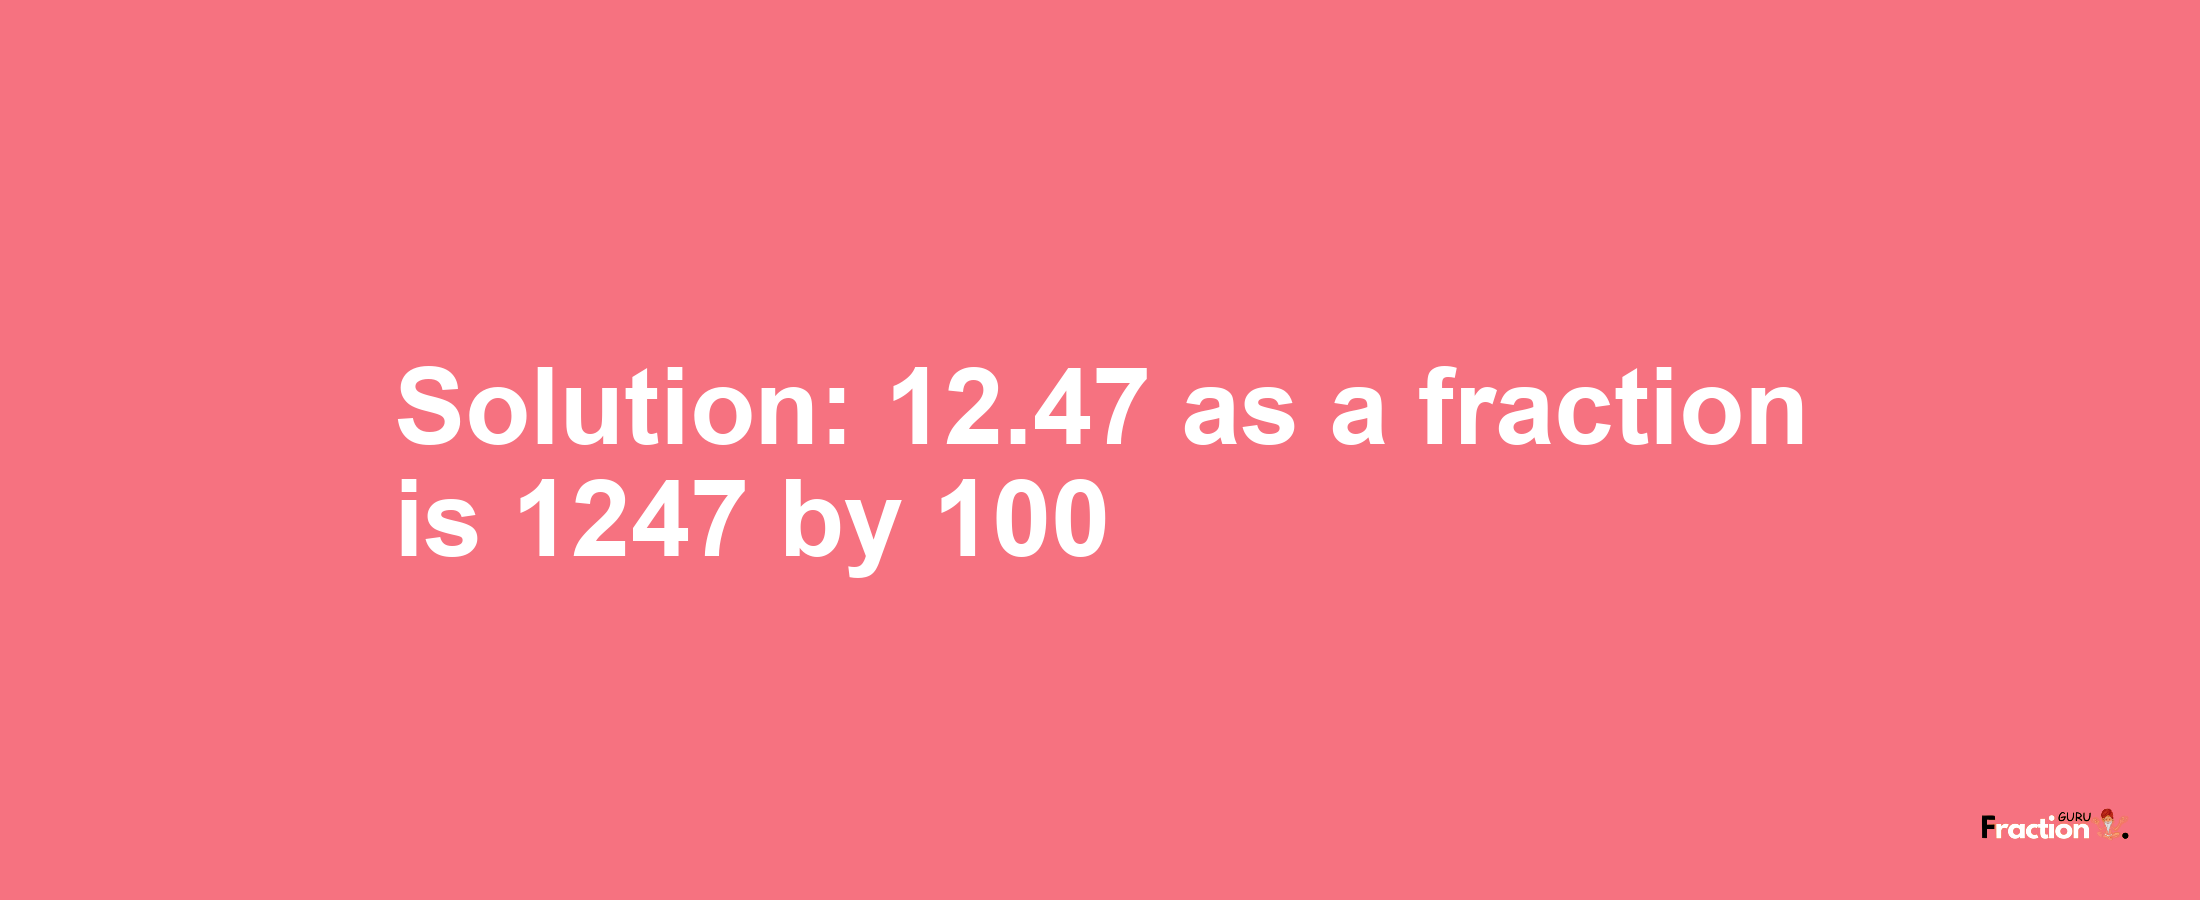 Solution:12.47 as a fraction is 1247/100